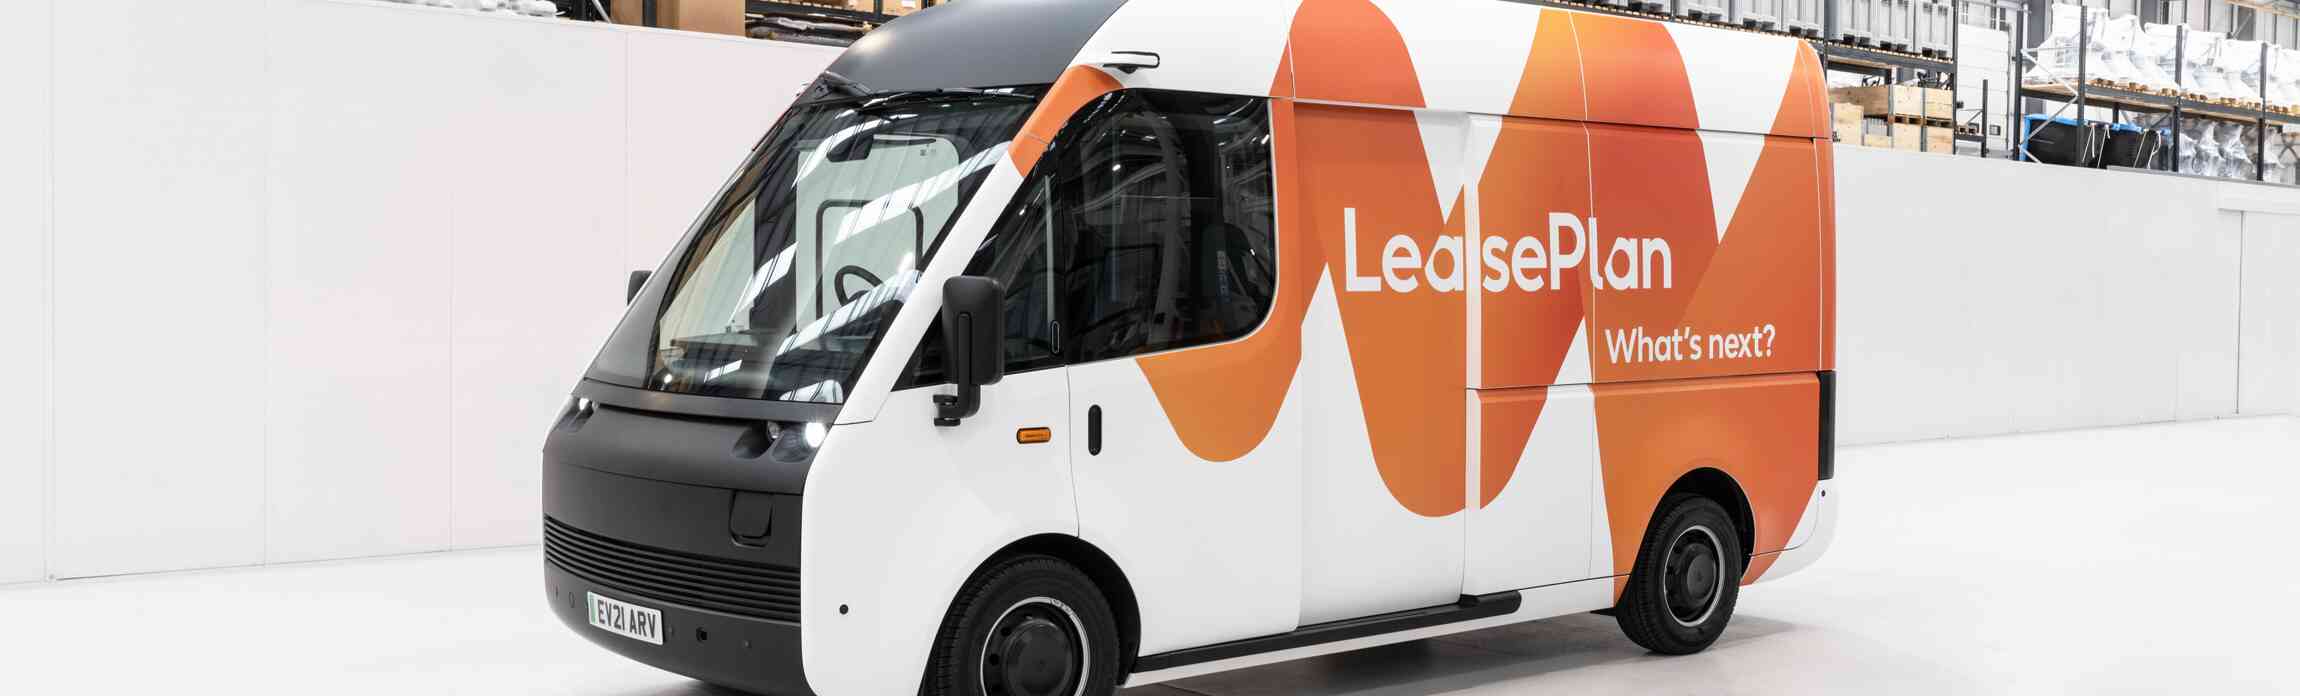 Arrival electric van branded with LeasePlan logo